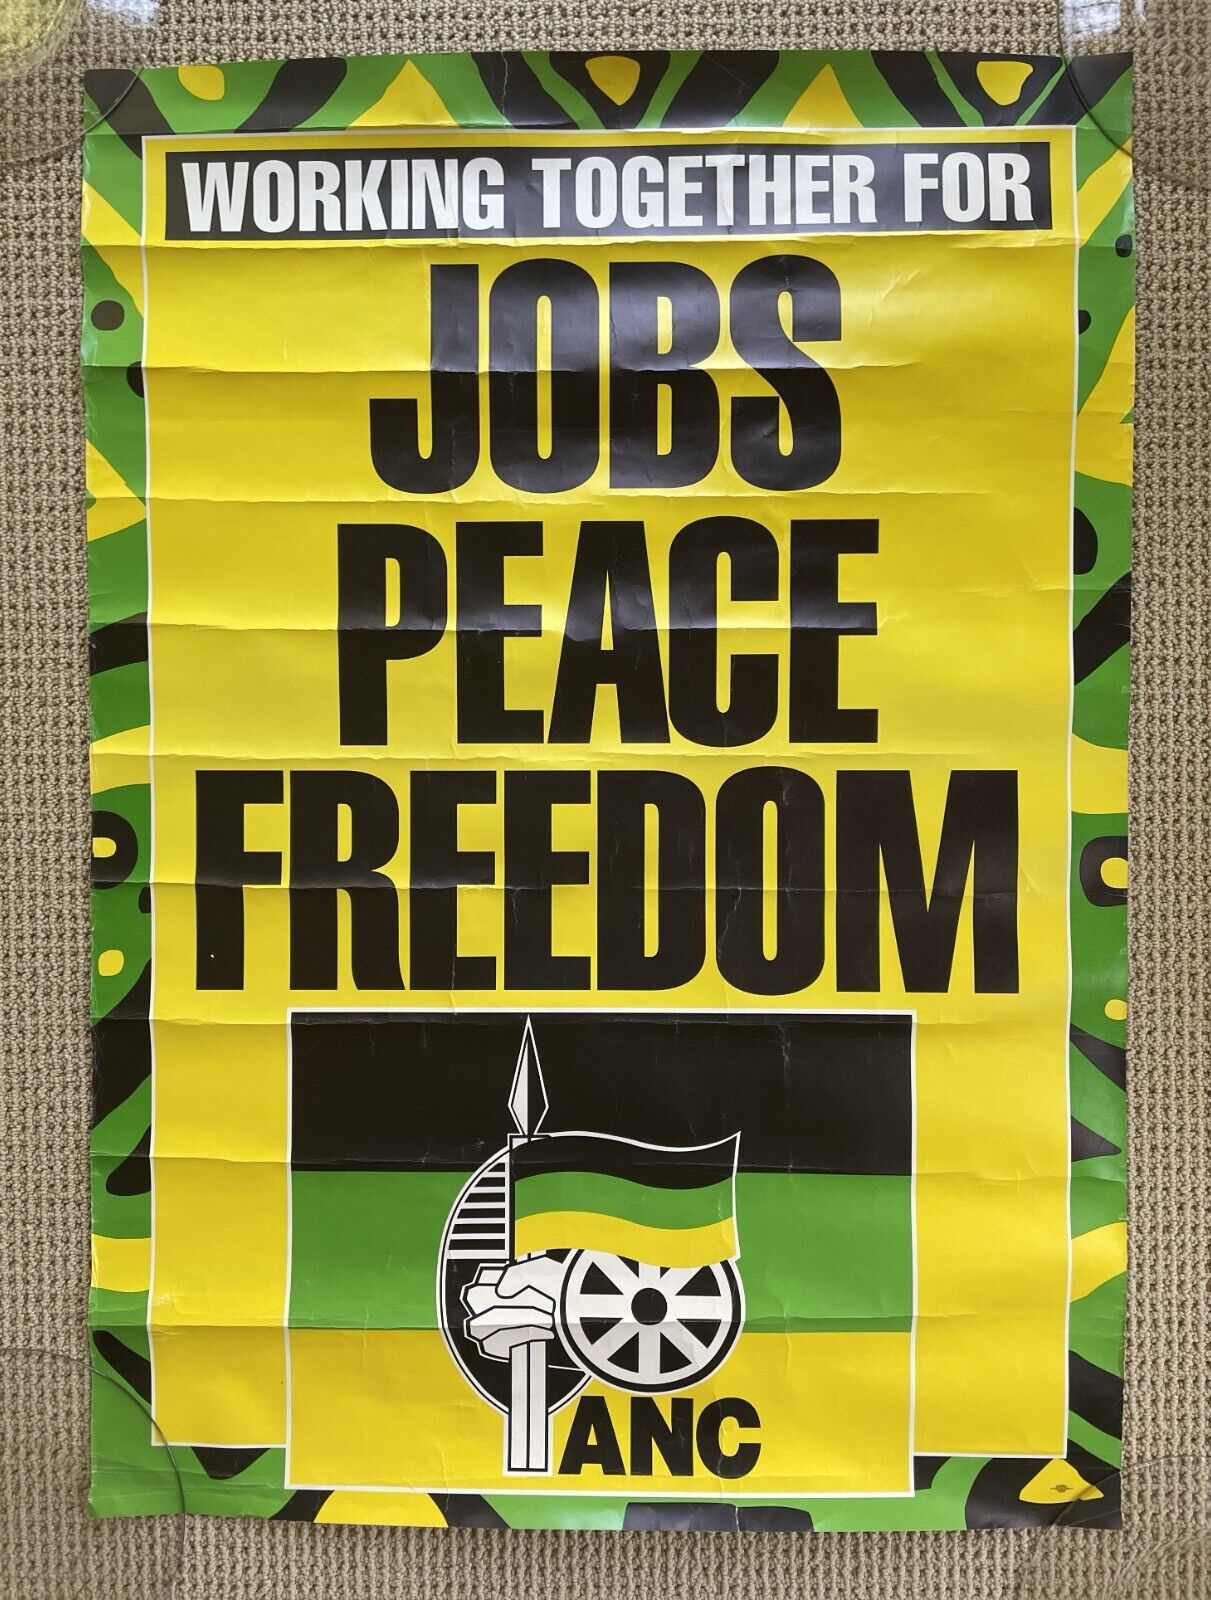 ANC - African Nation Congress Poster – Jobs Peace Freedom - Human Rights Vintage